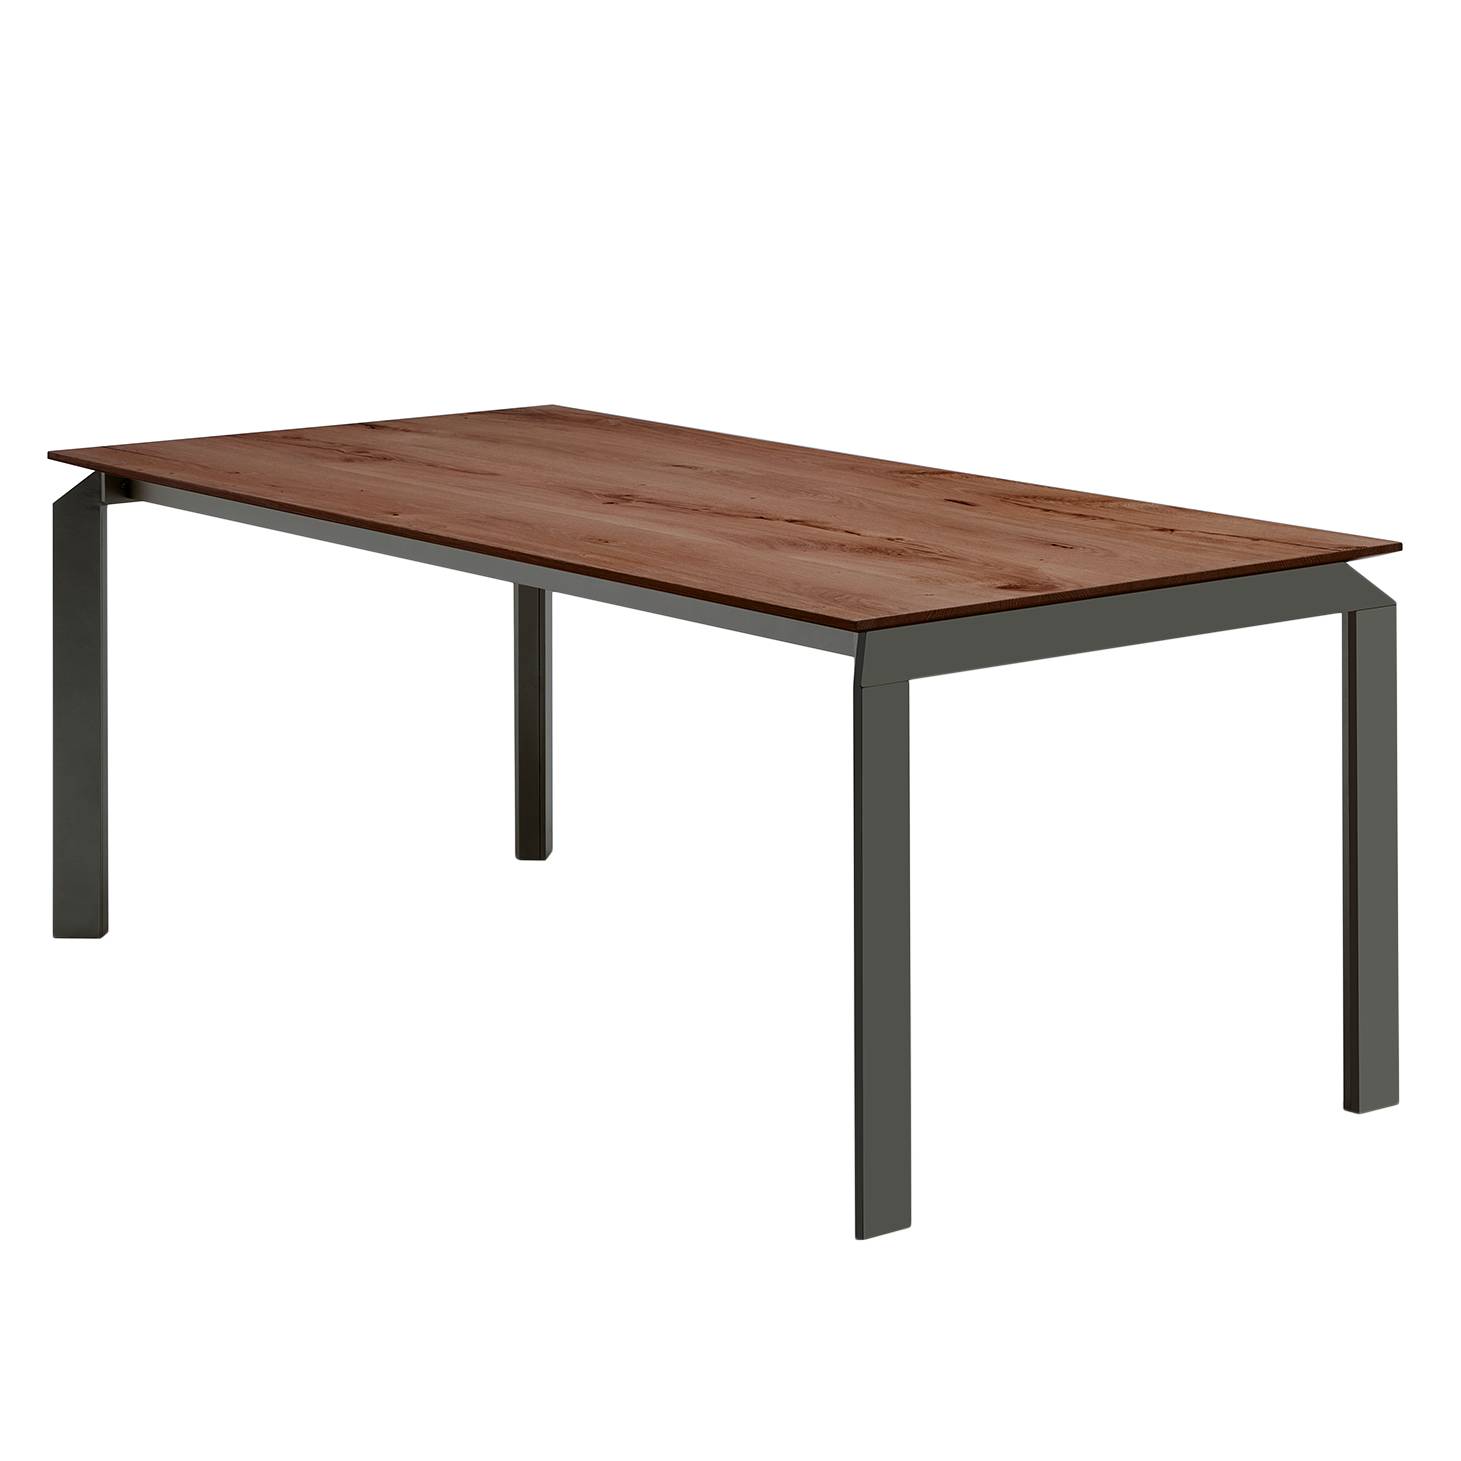 Image of Table basse Misano 000000001000188653